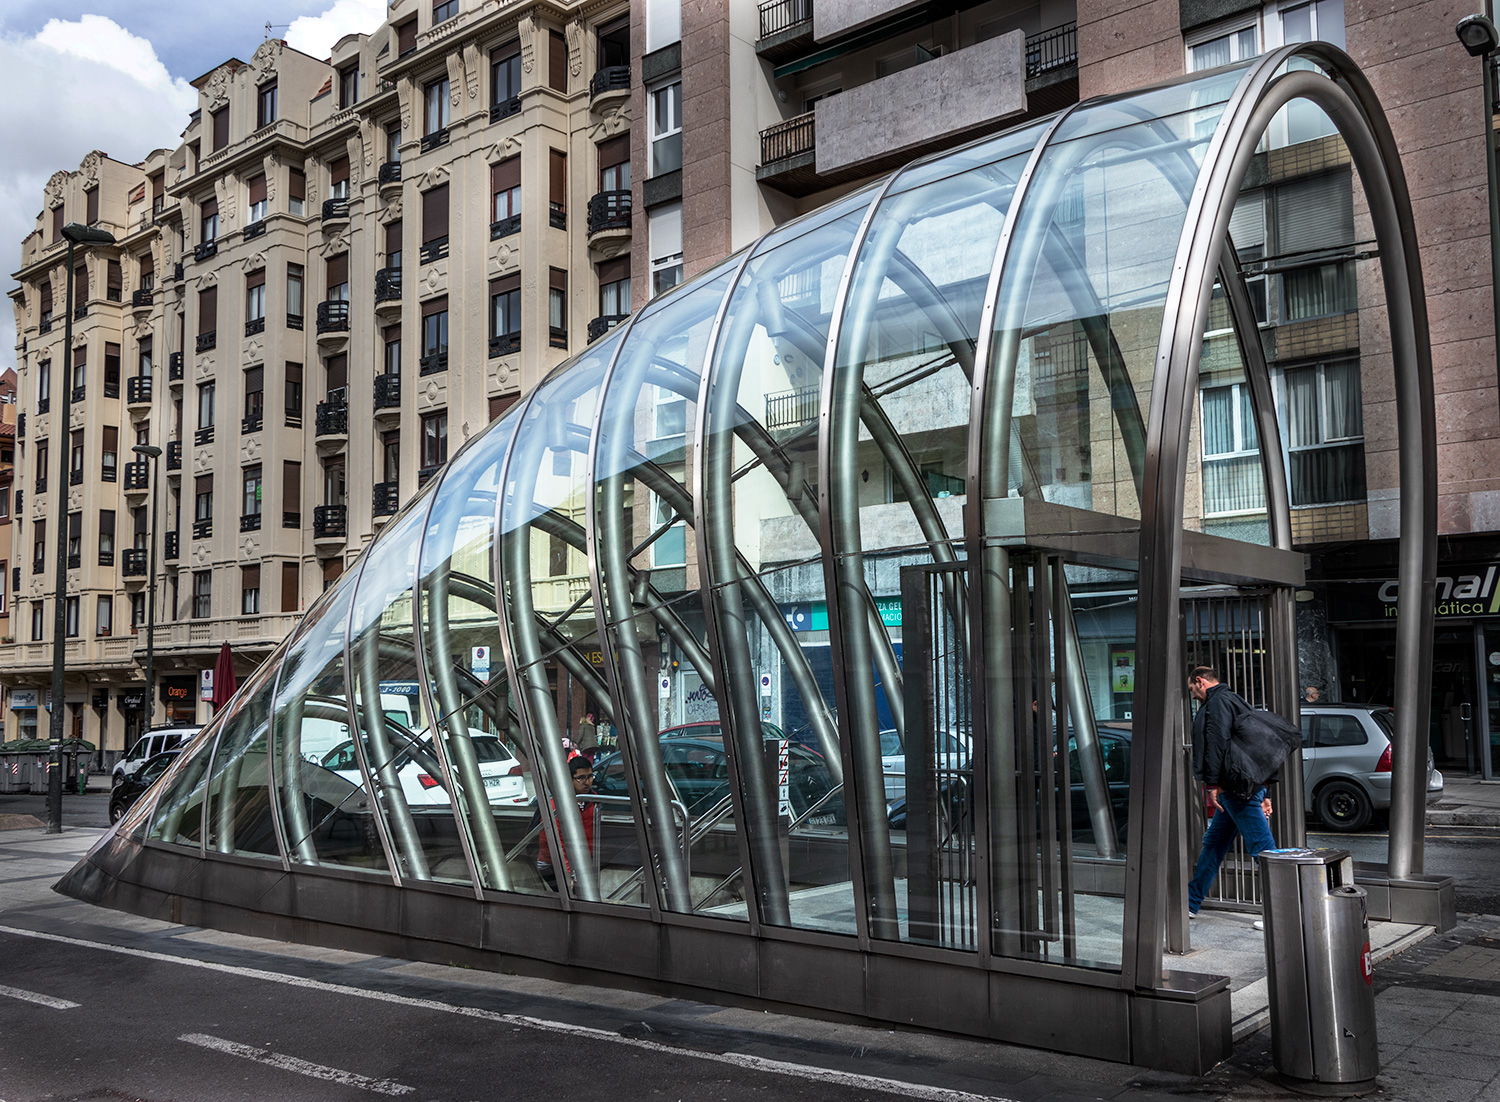 The Bilbao Metro was designed by Norman Foster.